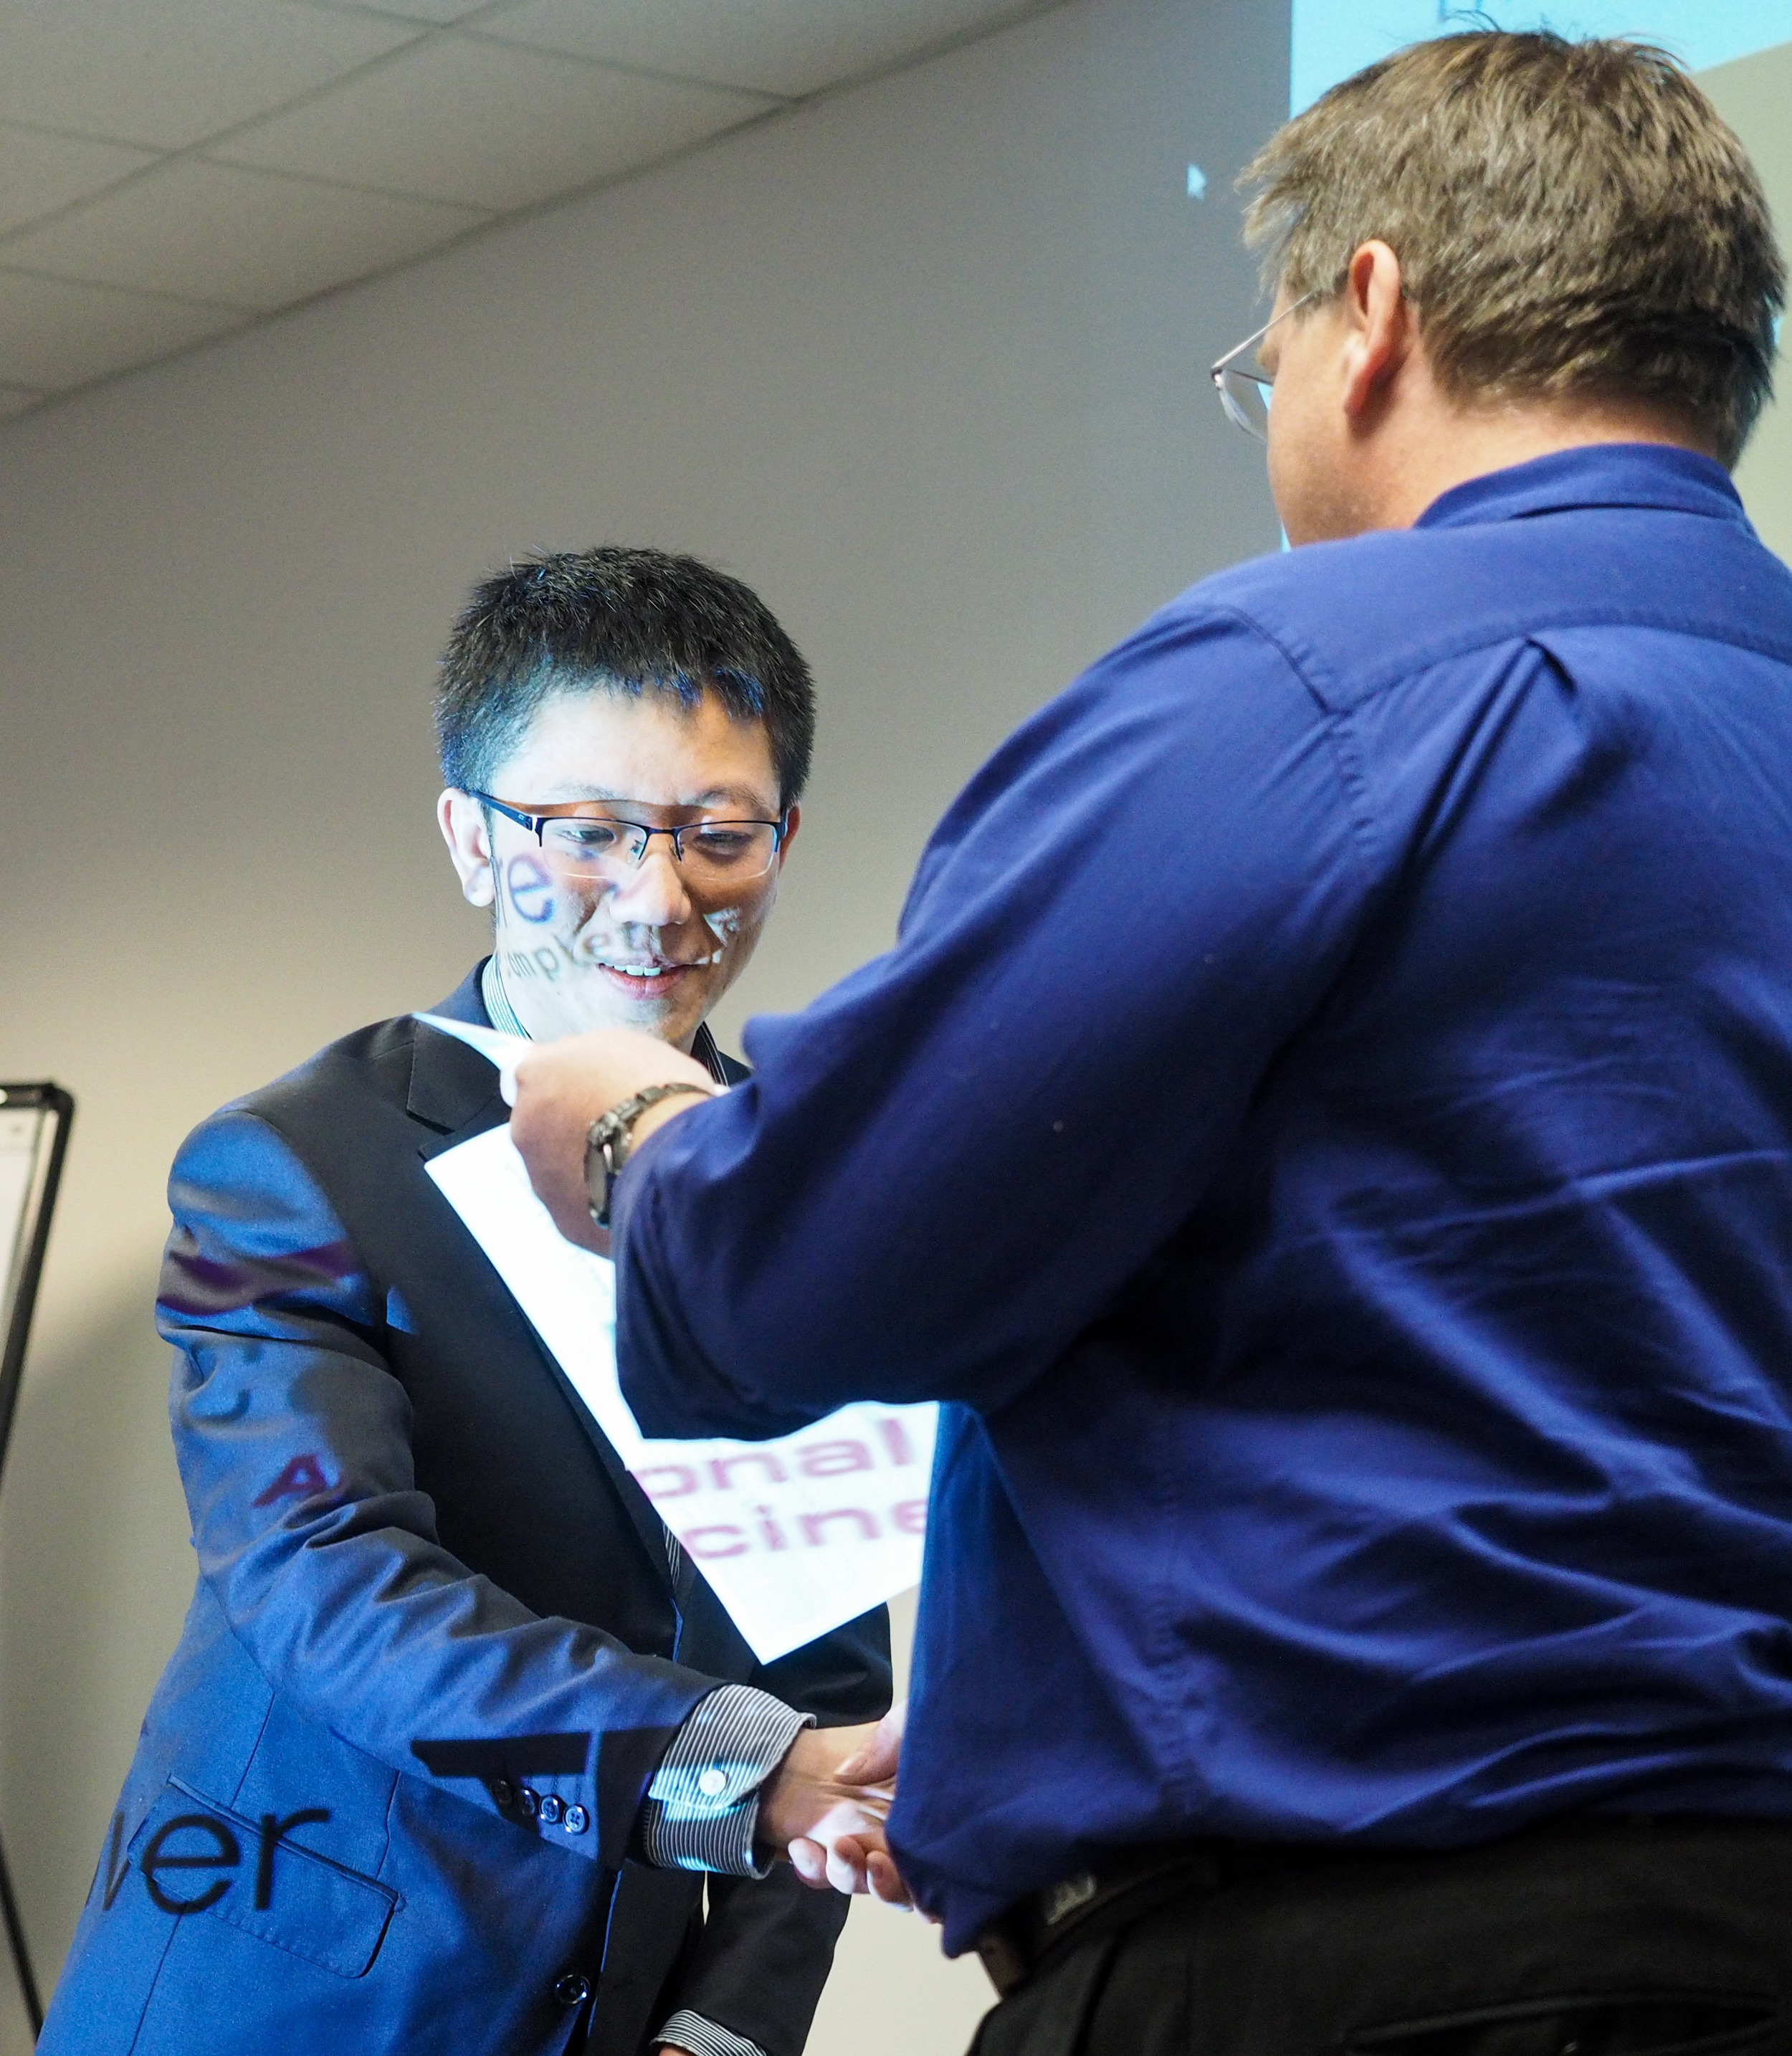 RTP DMDG Poster Review Chair, Steve Ferguson, presents Hao Cai with the poster award.